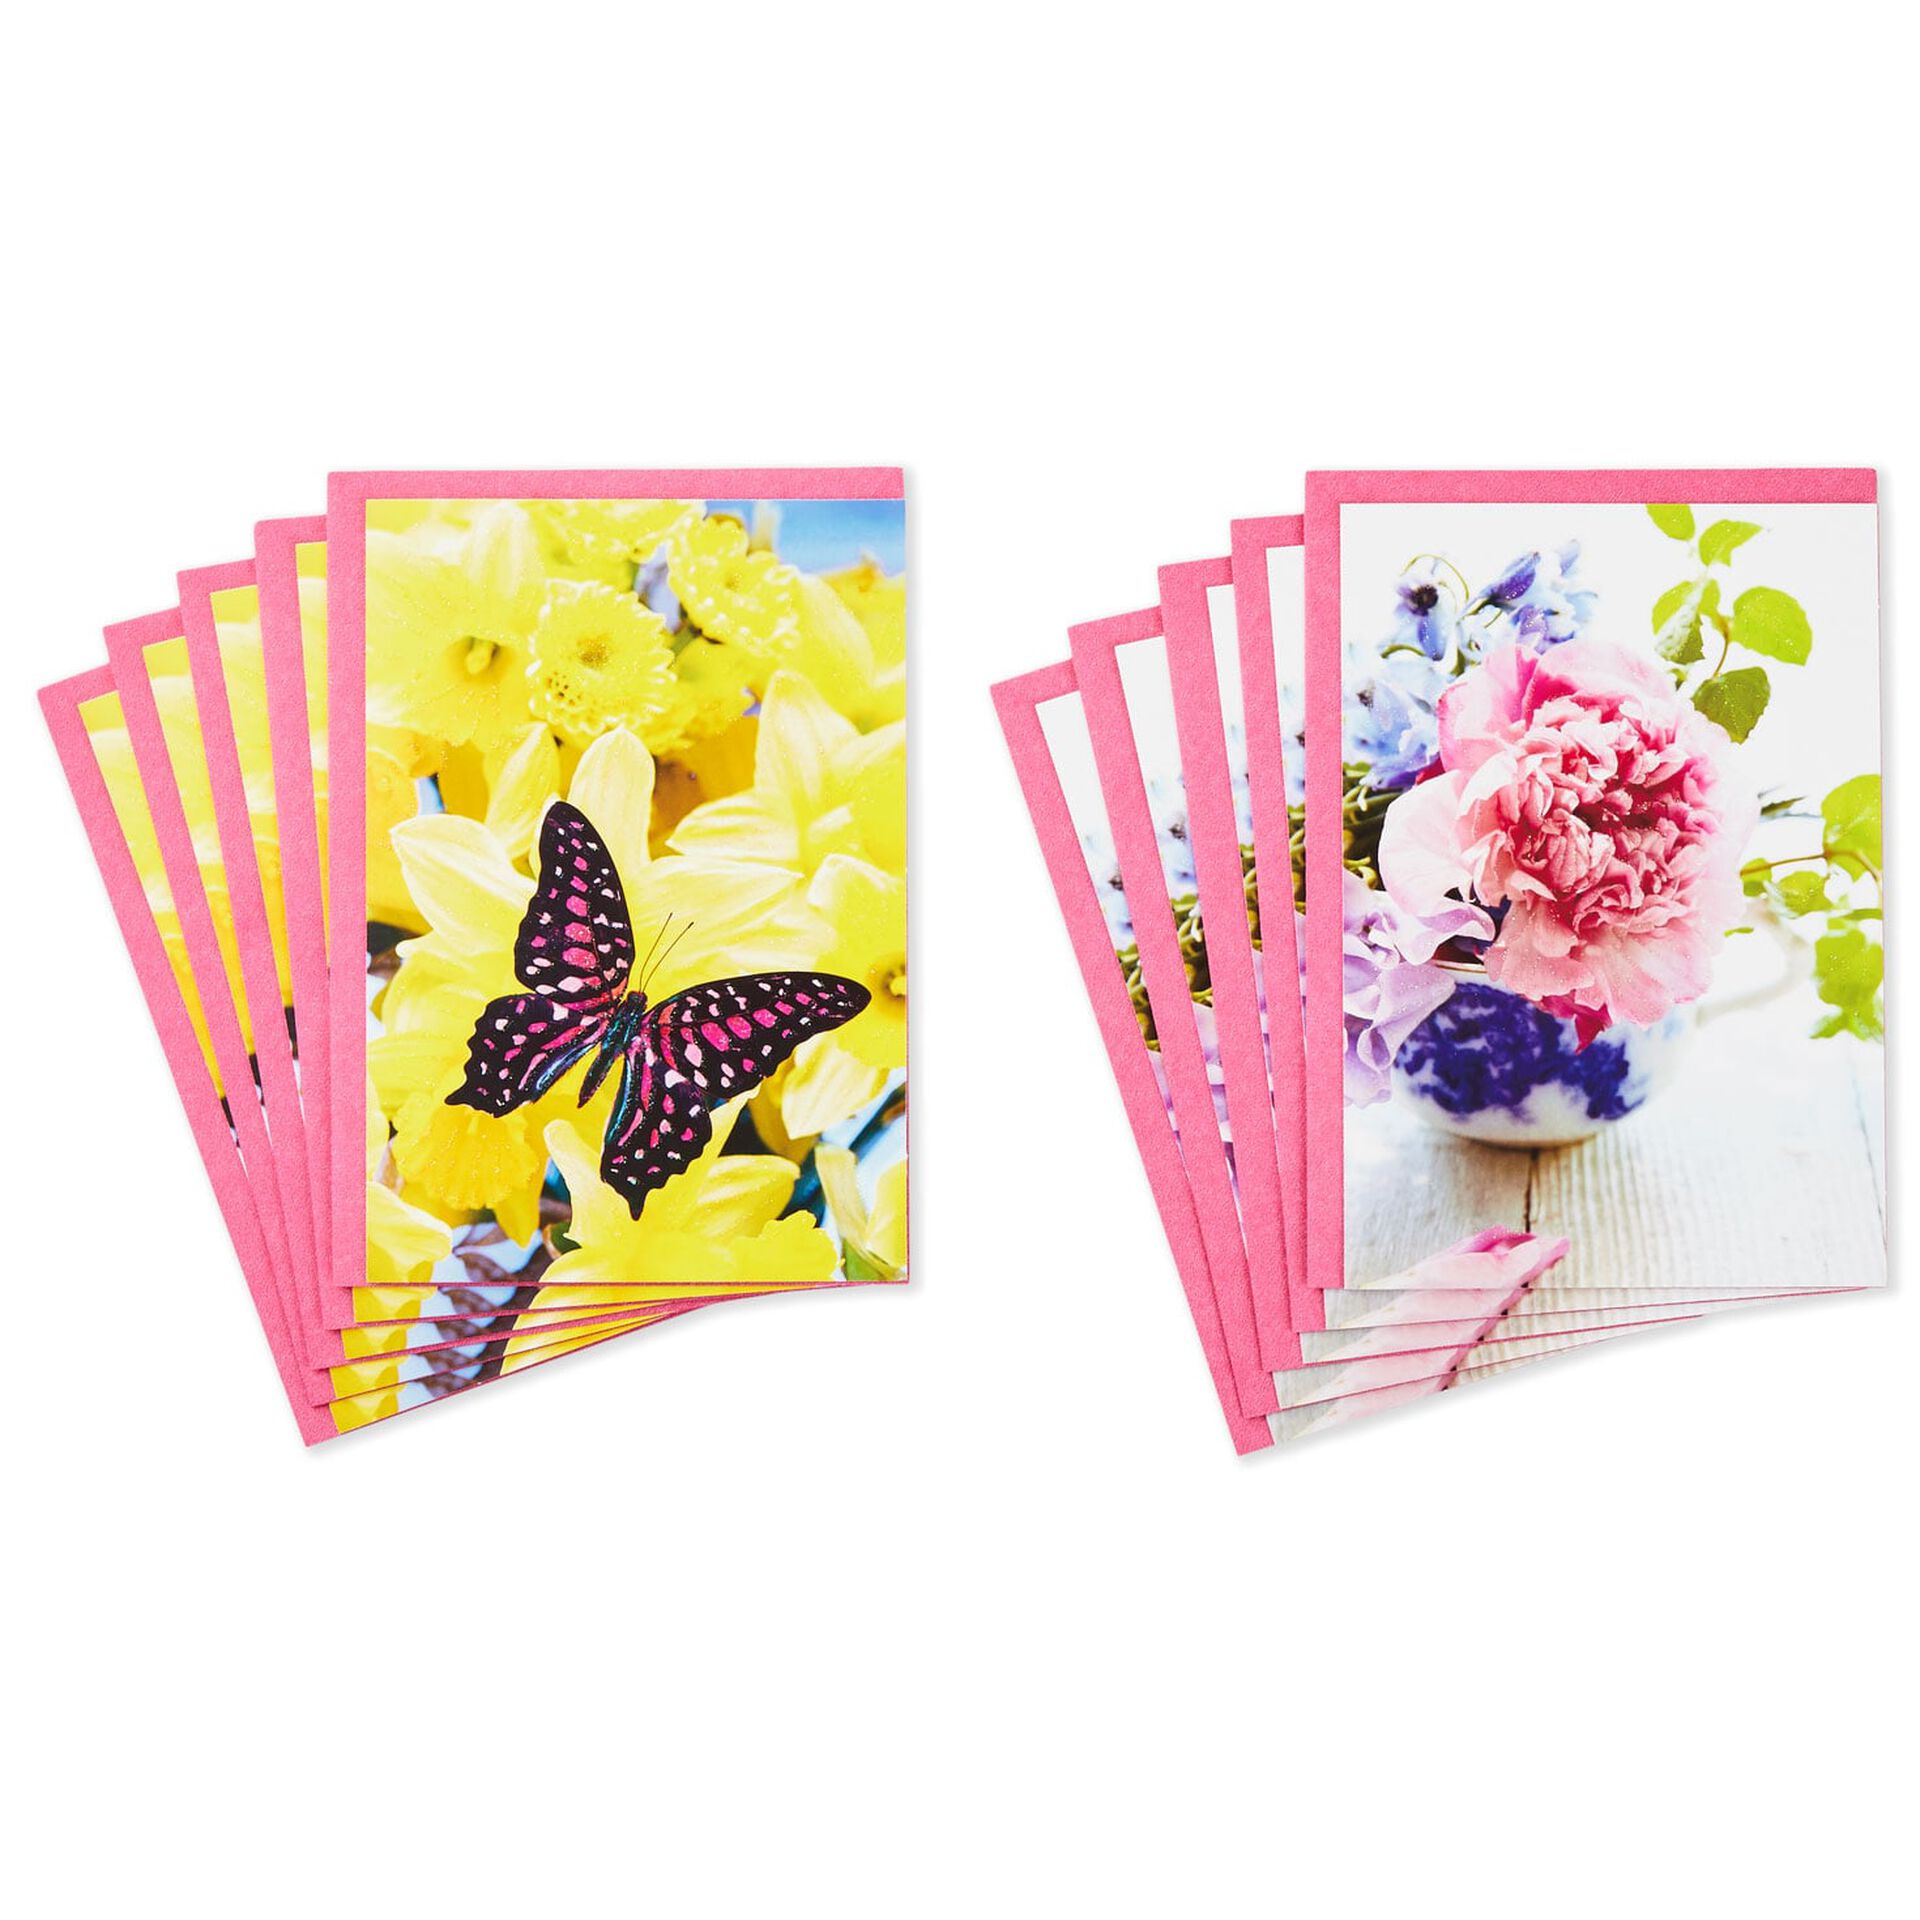 Whimsy Flowers with Butterfly Blank Card-Any Occasion Papyrus Greeting Card